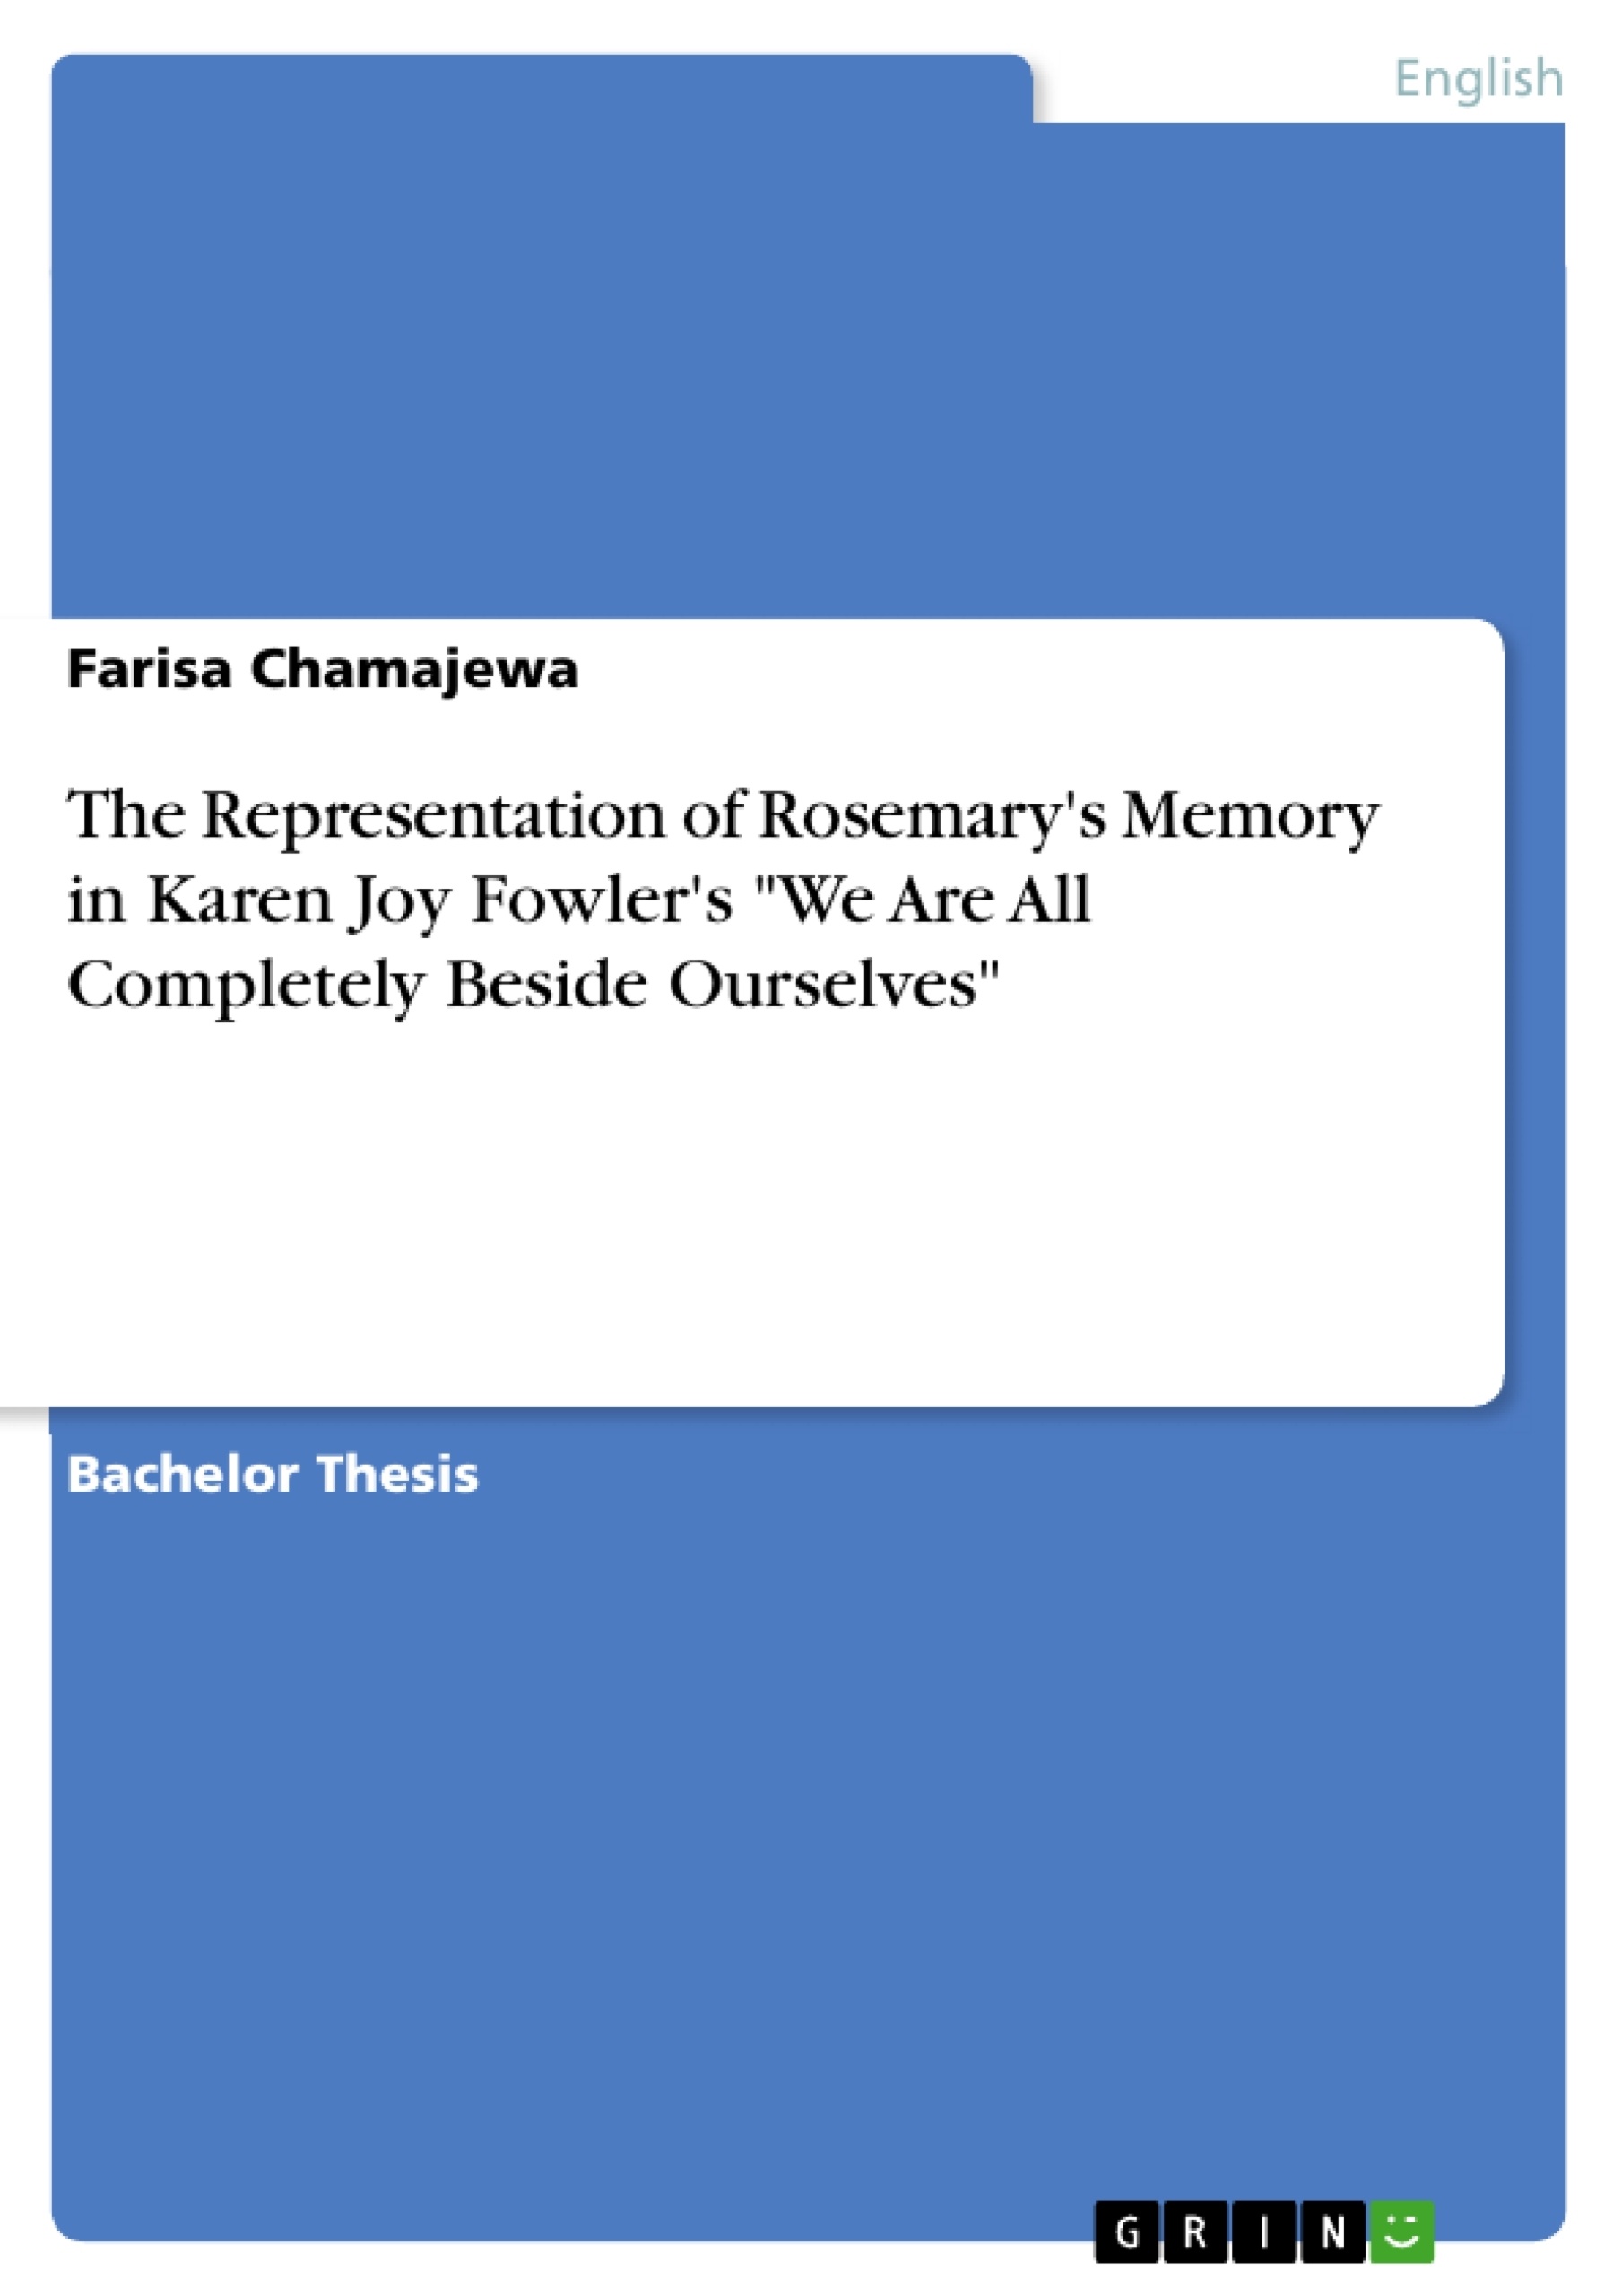 Titre: The Representation of Rosemary's Memory in Karen Joy Fowler's "We Are All Completely Beside Ourselves"